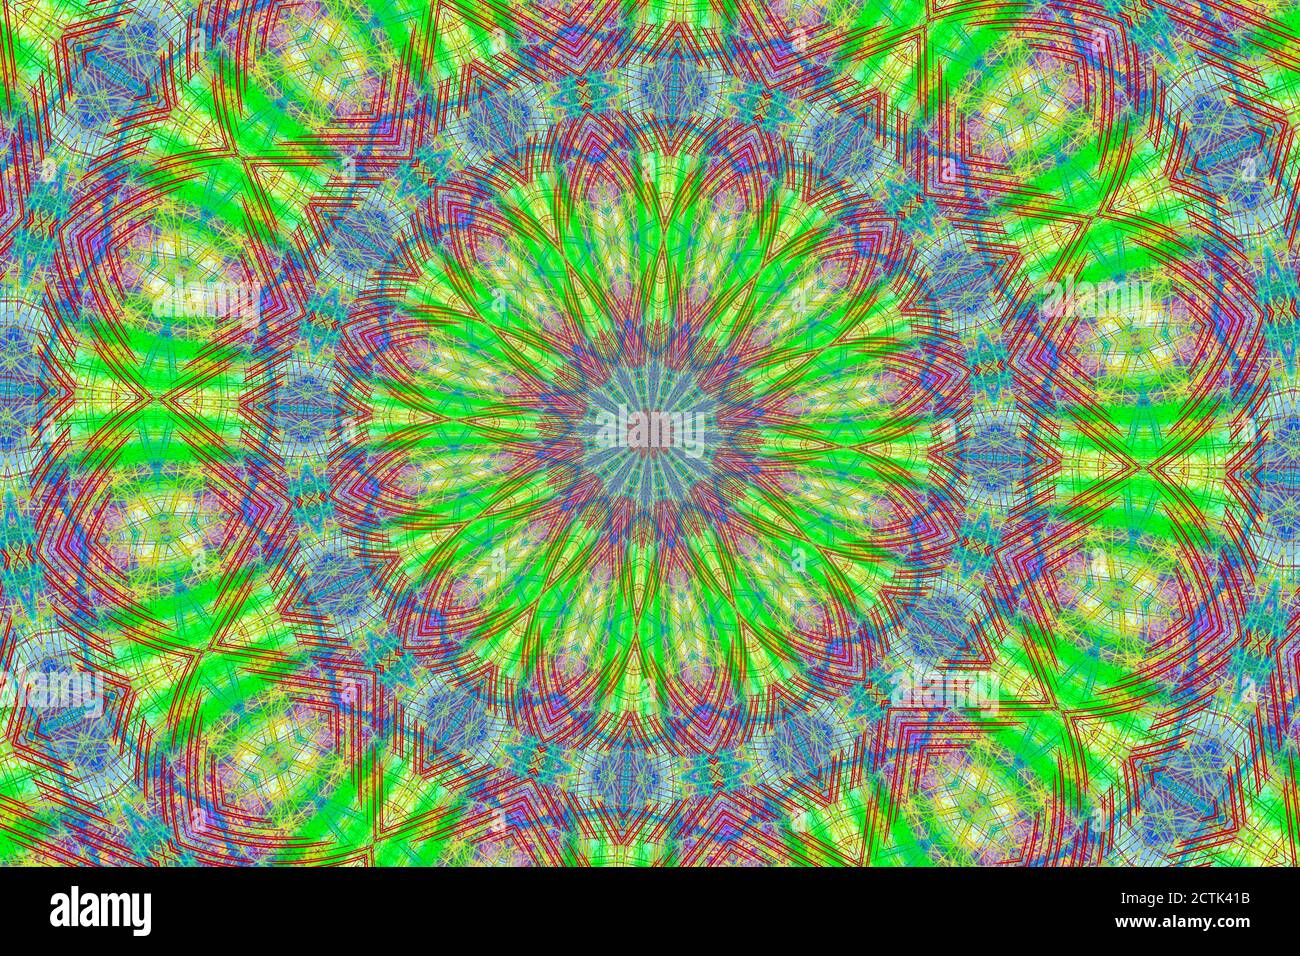 Blue,pink,yellow,purple,green,orange neon paper color for background.  Swirling kaleidoscopic geometric pattern of bright colors. Stock Photo